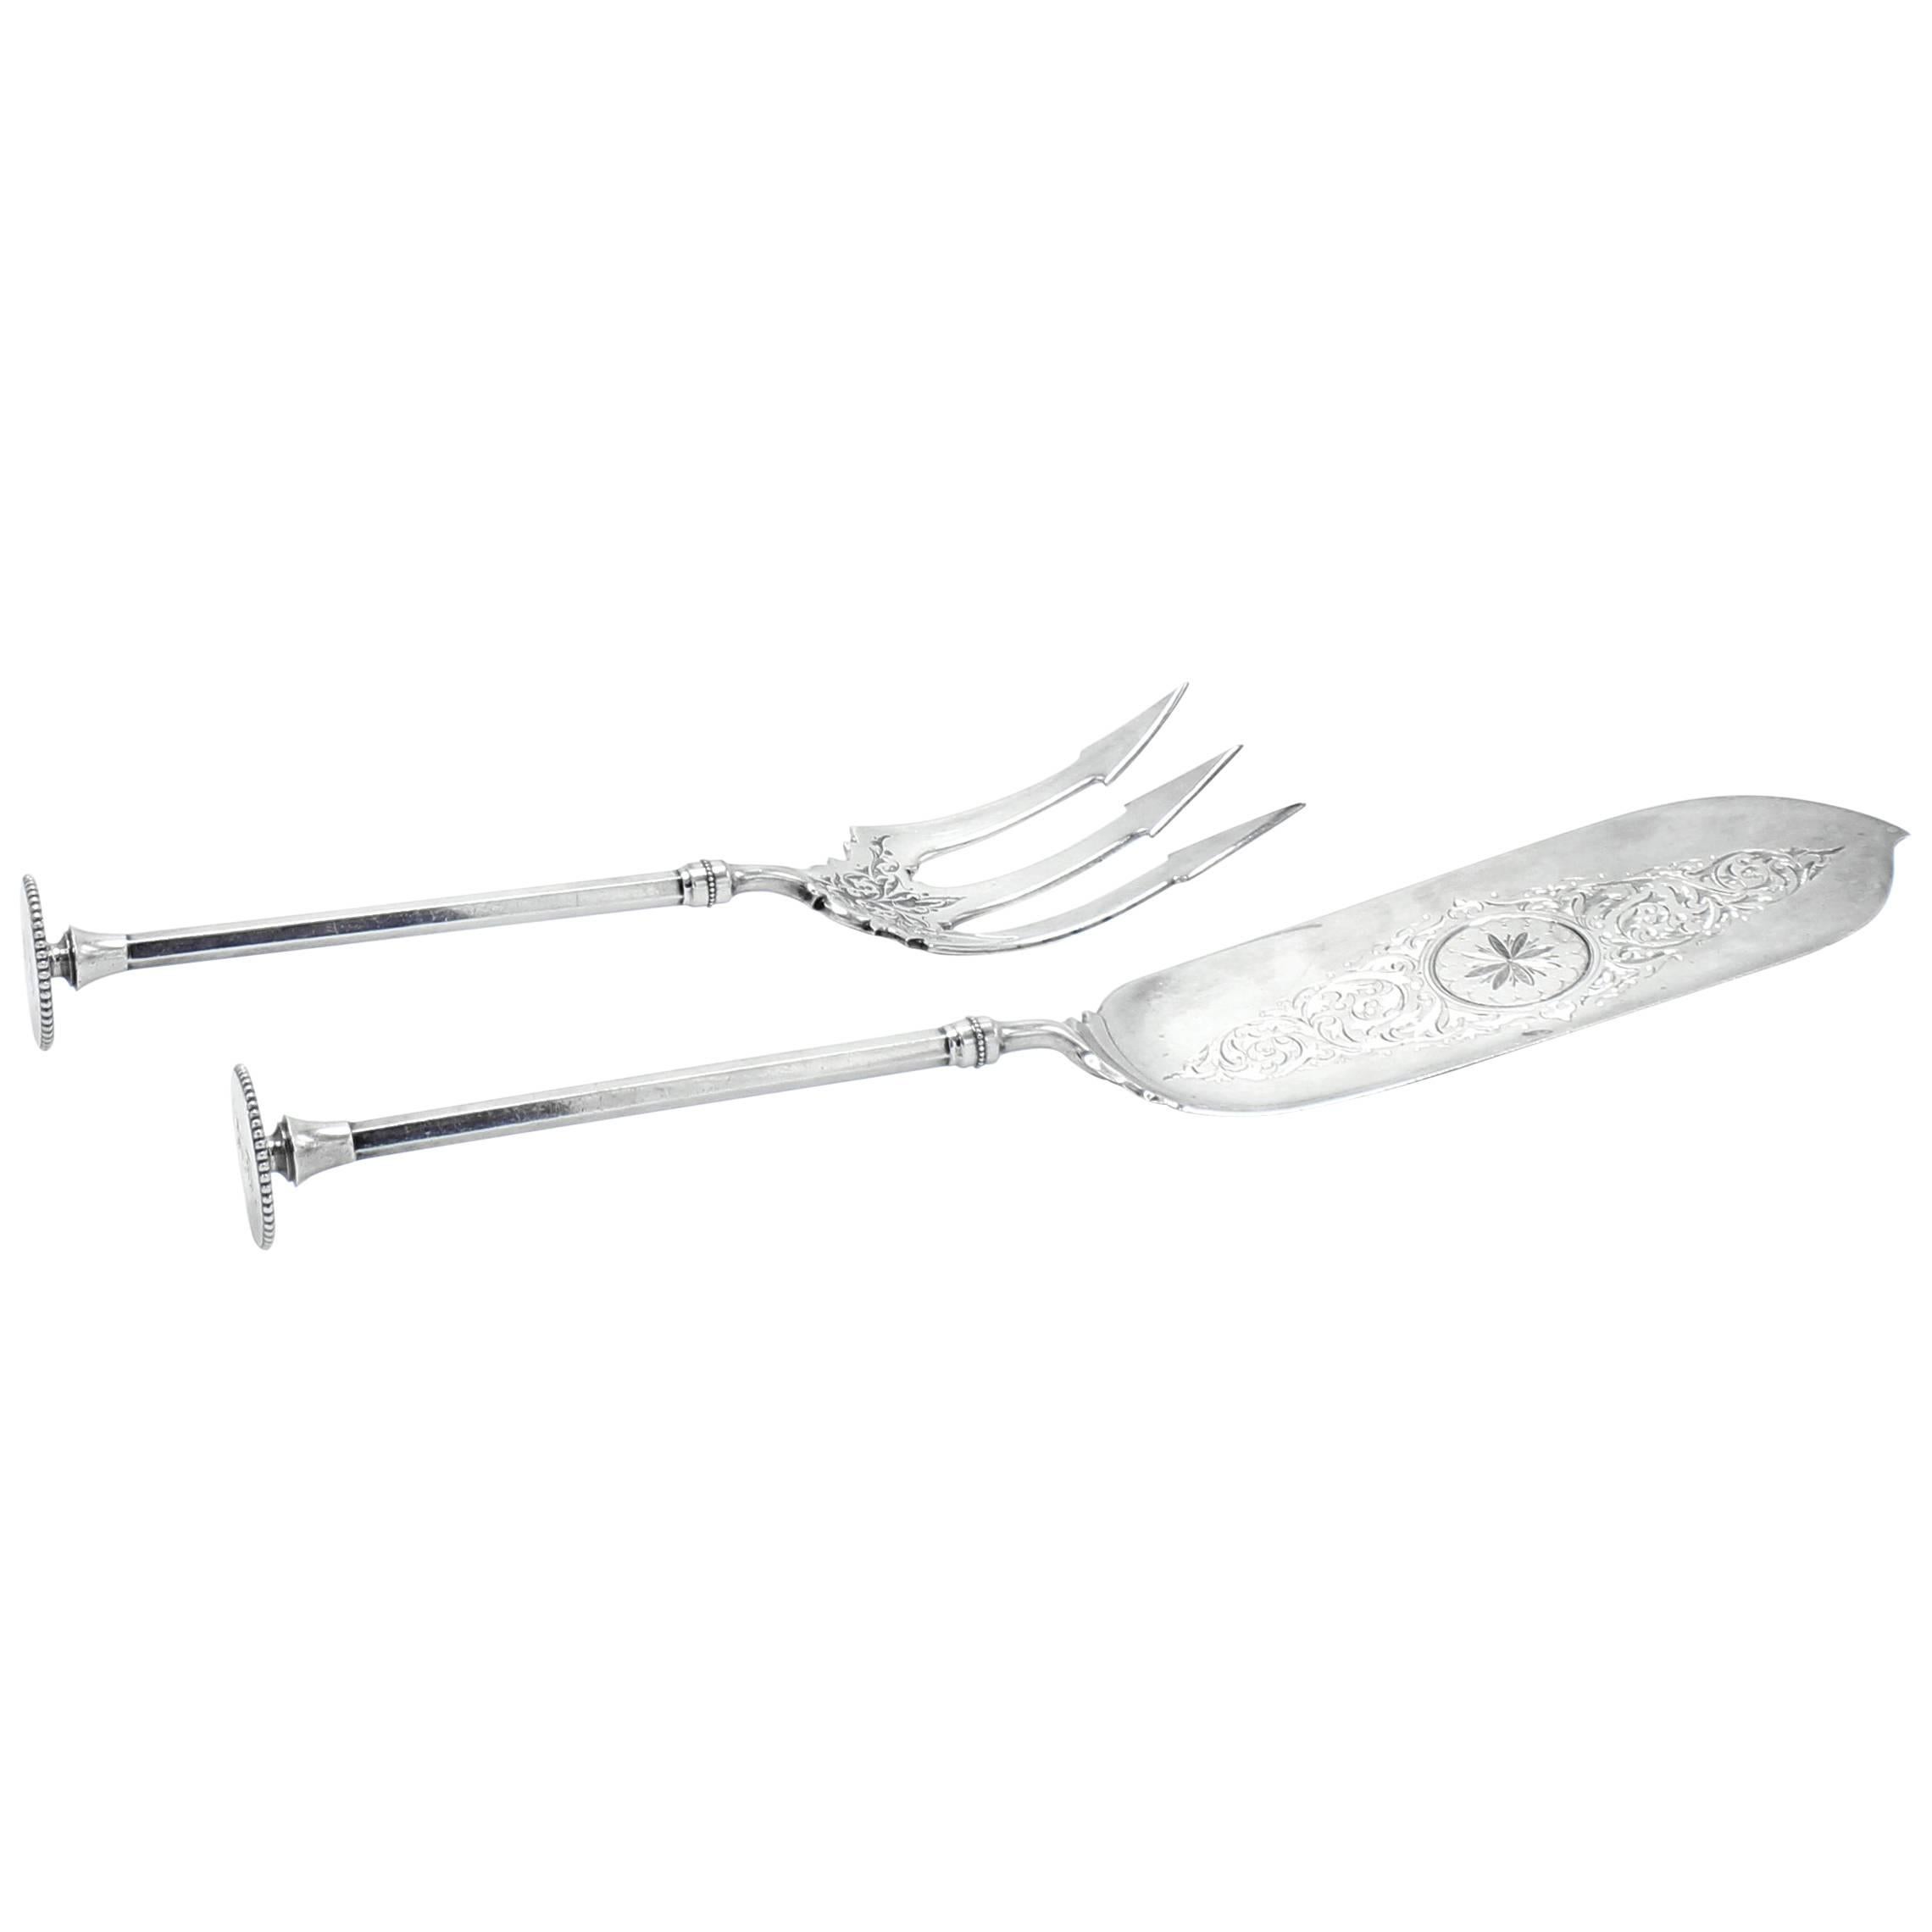 Benedict Brothers Sterling Fish Serving Set